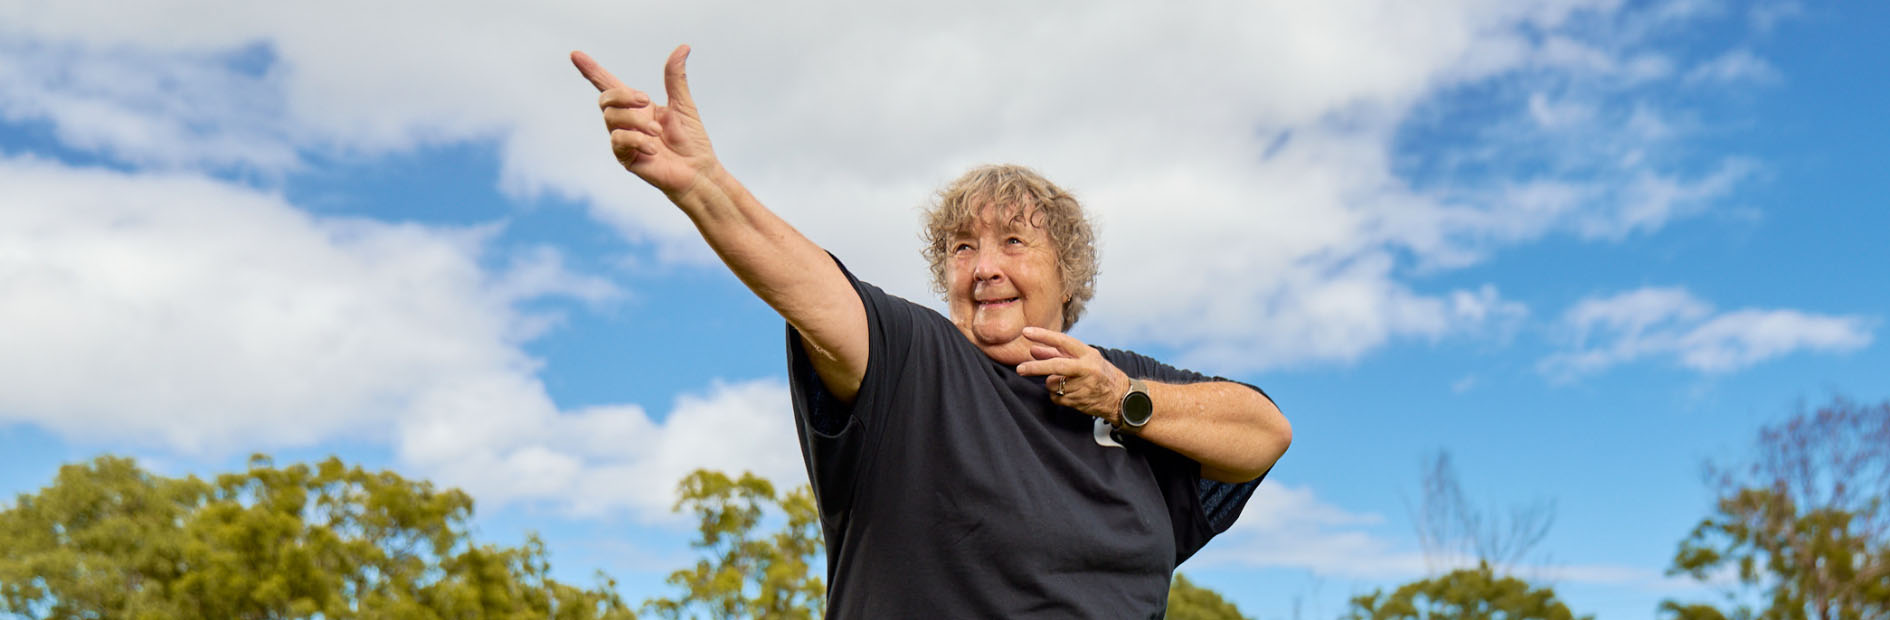 Elderly woman dressed in black does yoga moves